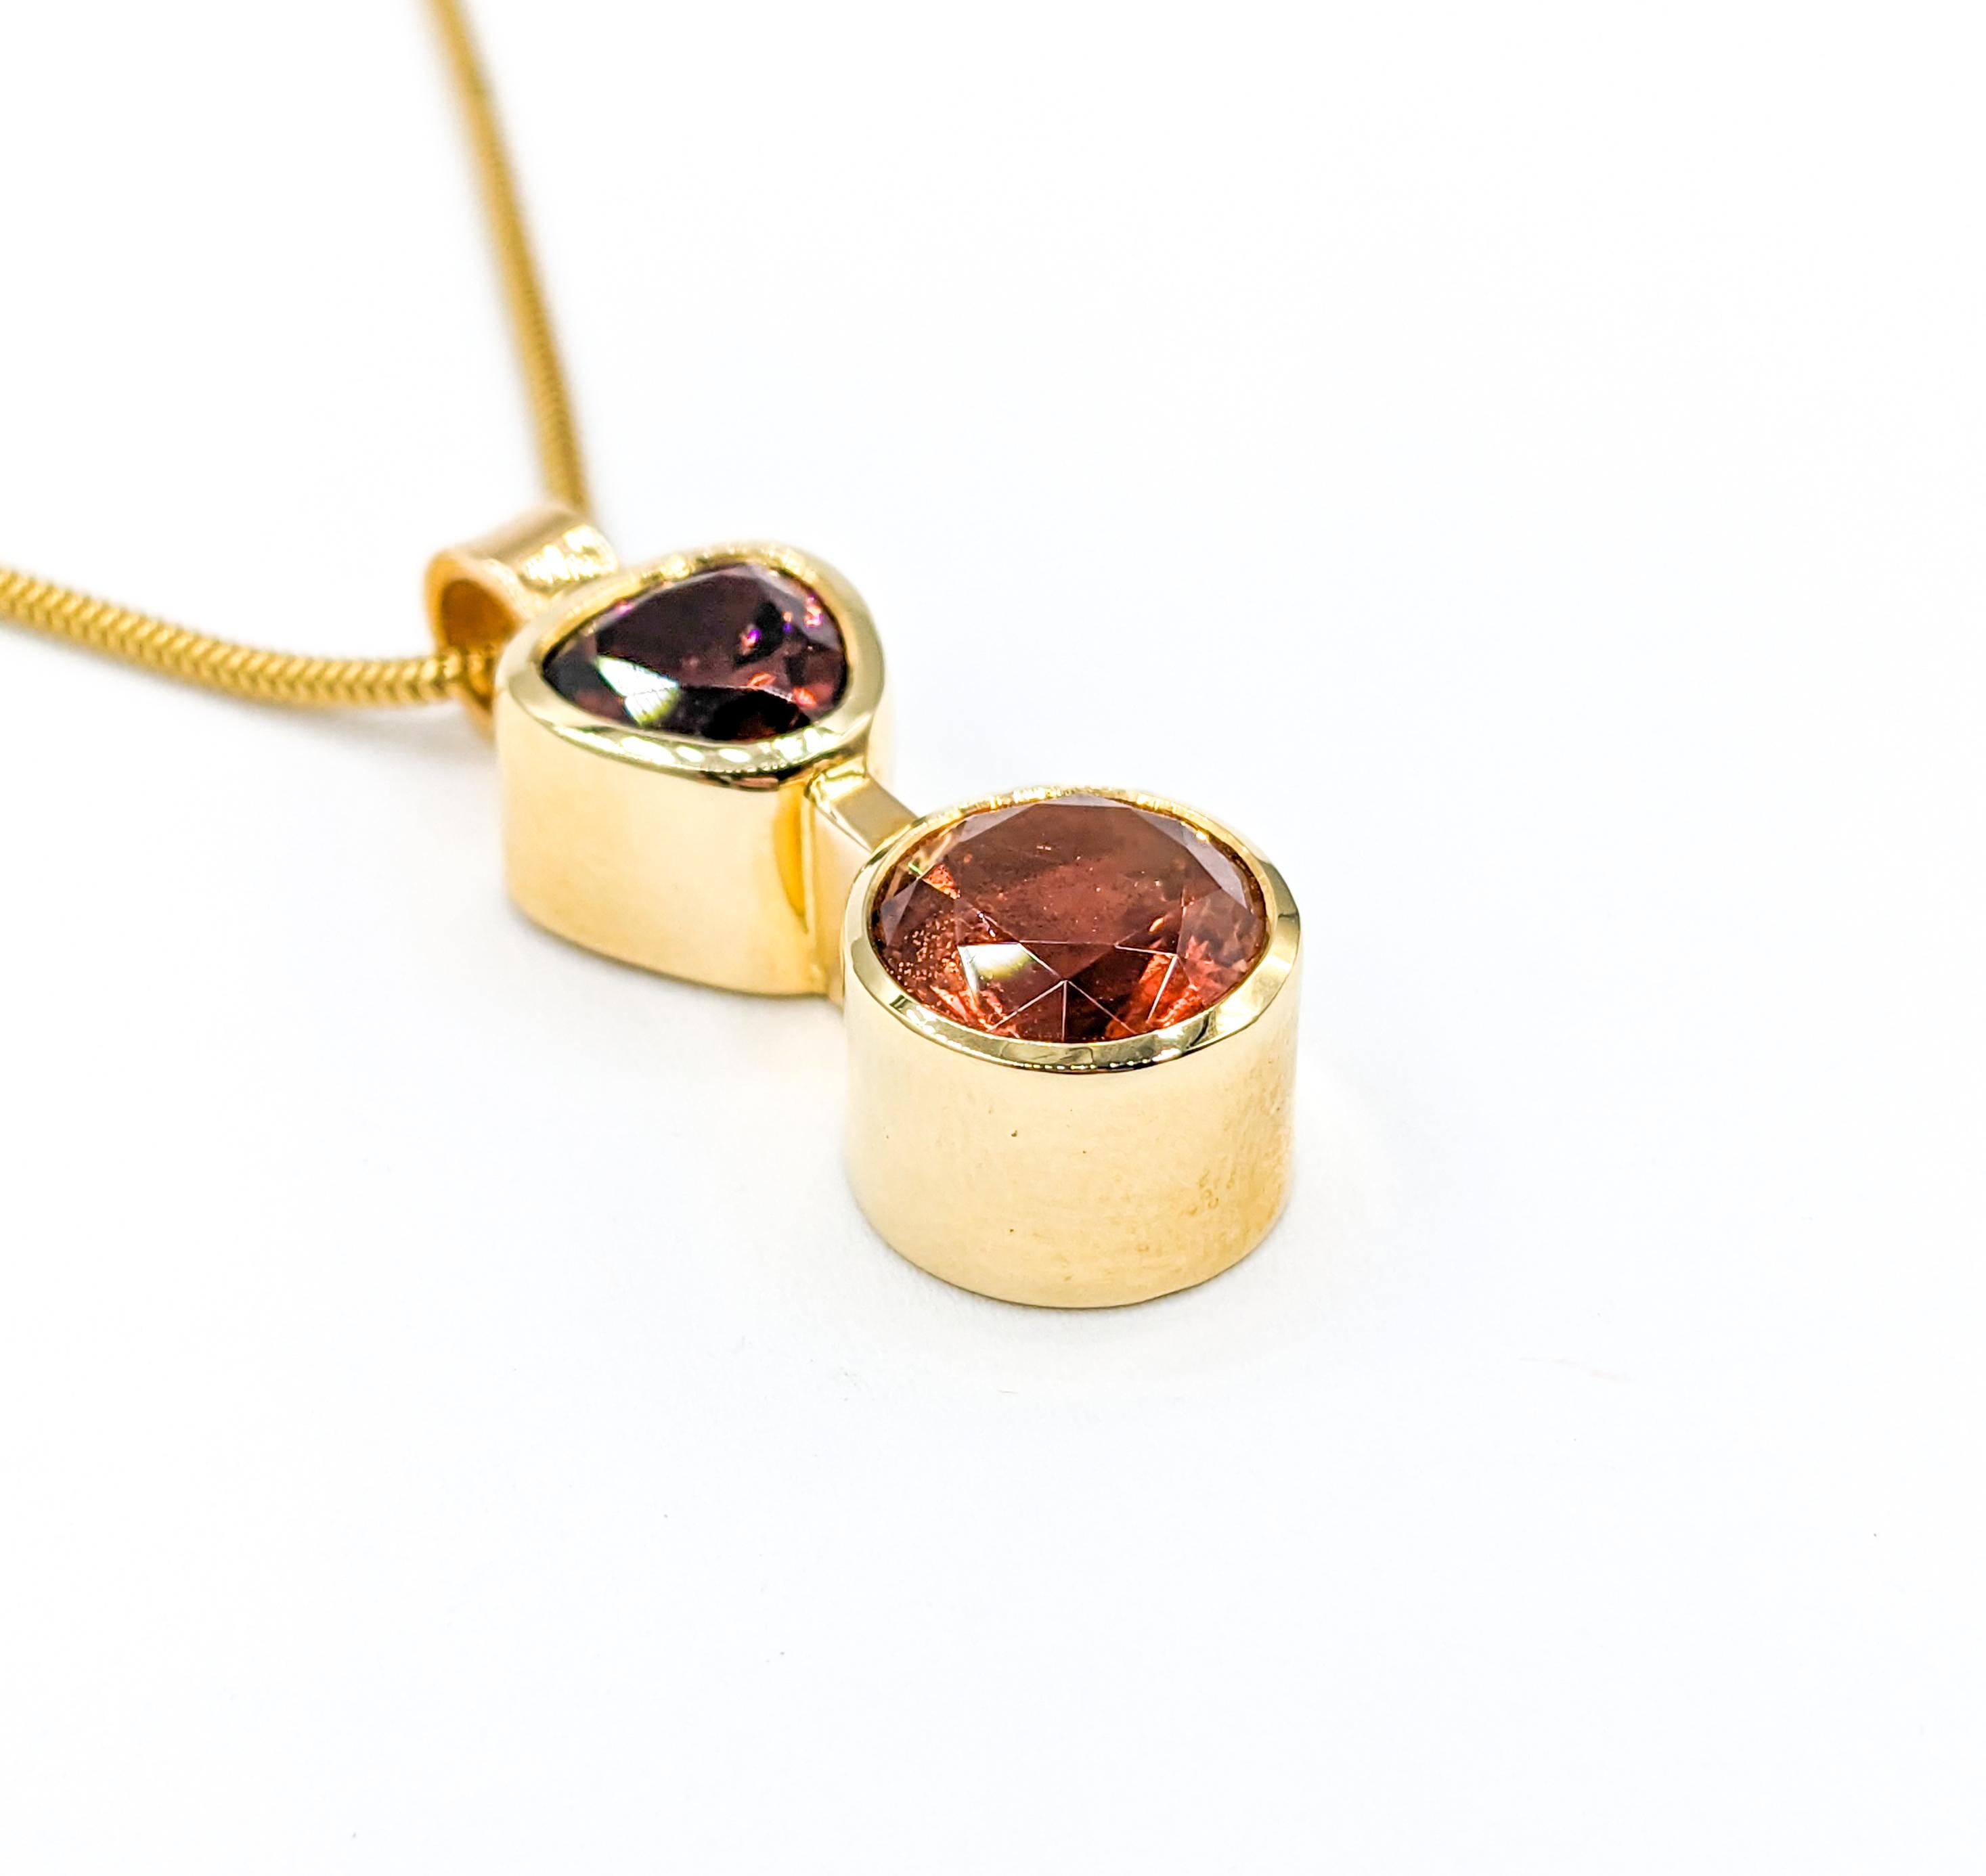 Custom Sunstone & Tourmaline Bezel Pendant Necklace in 14k Gold In Excellent Condition For Sale In Bloomington, MN